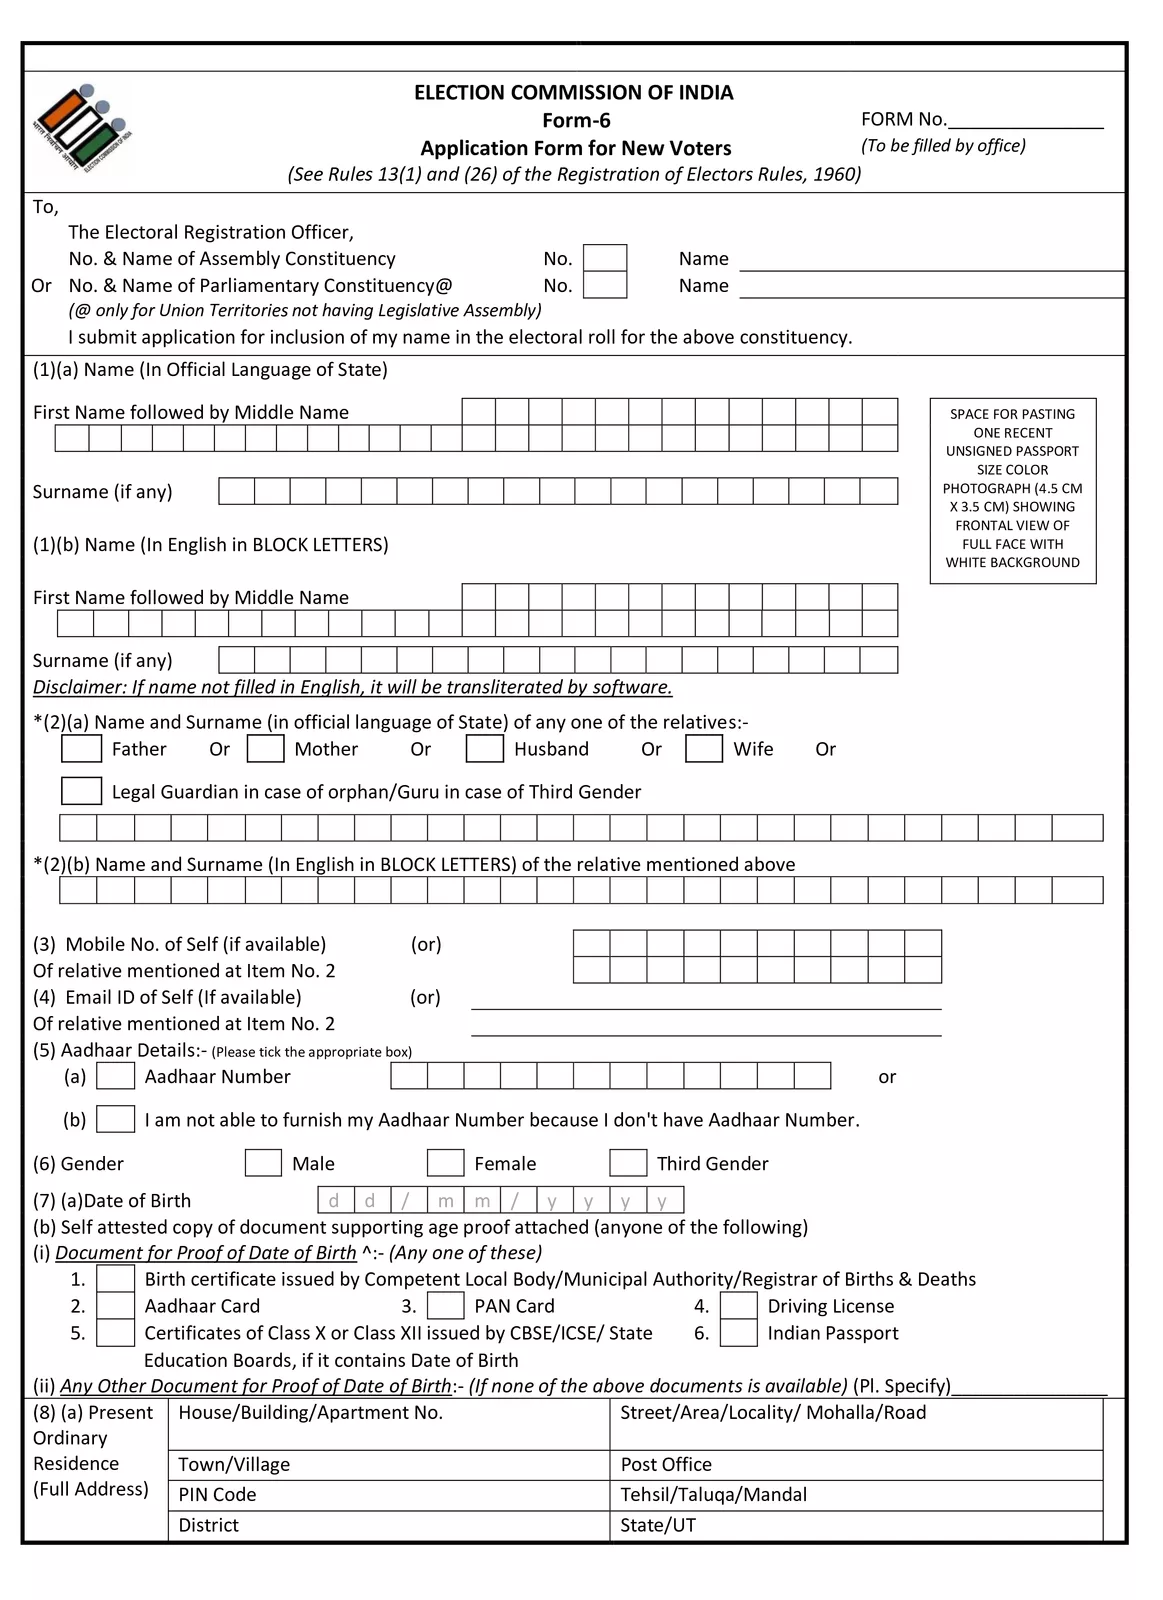 New Voter Application Form (Form-6 in Hindi & English) PDF